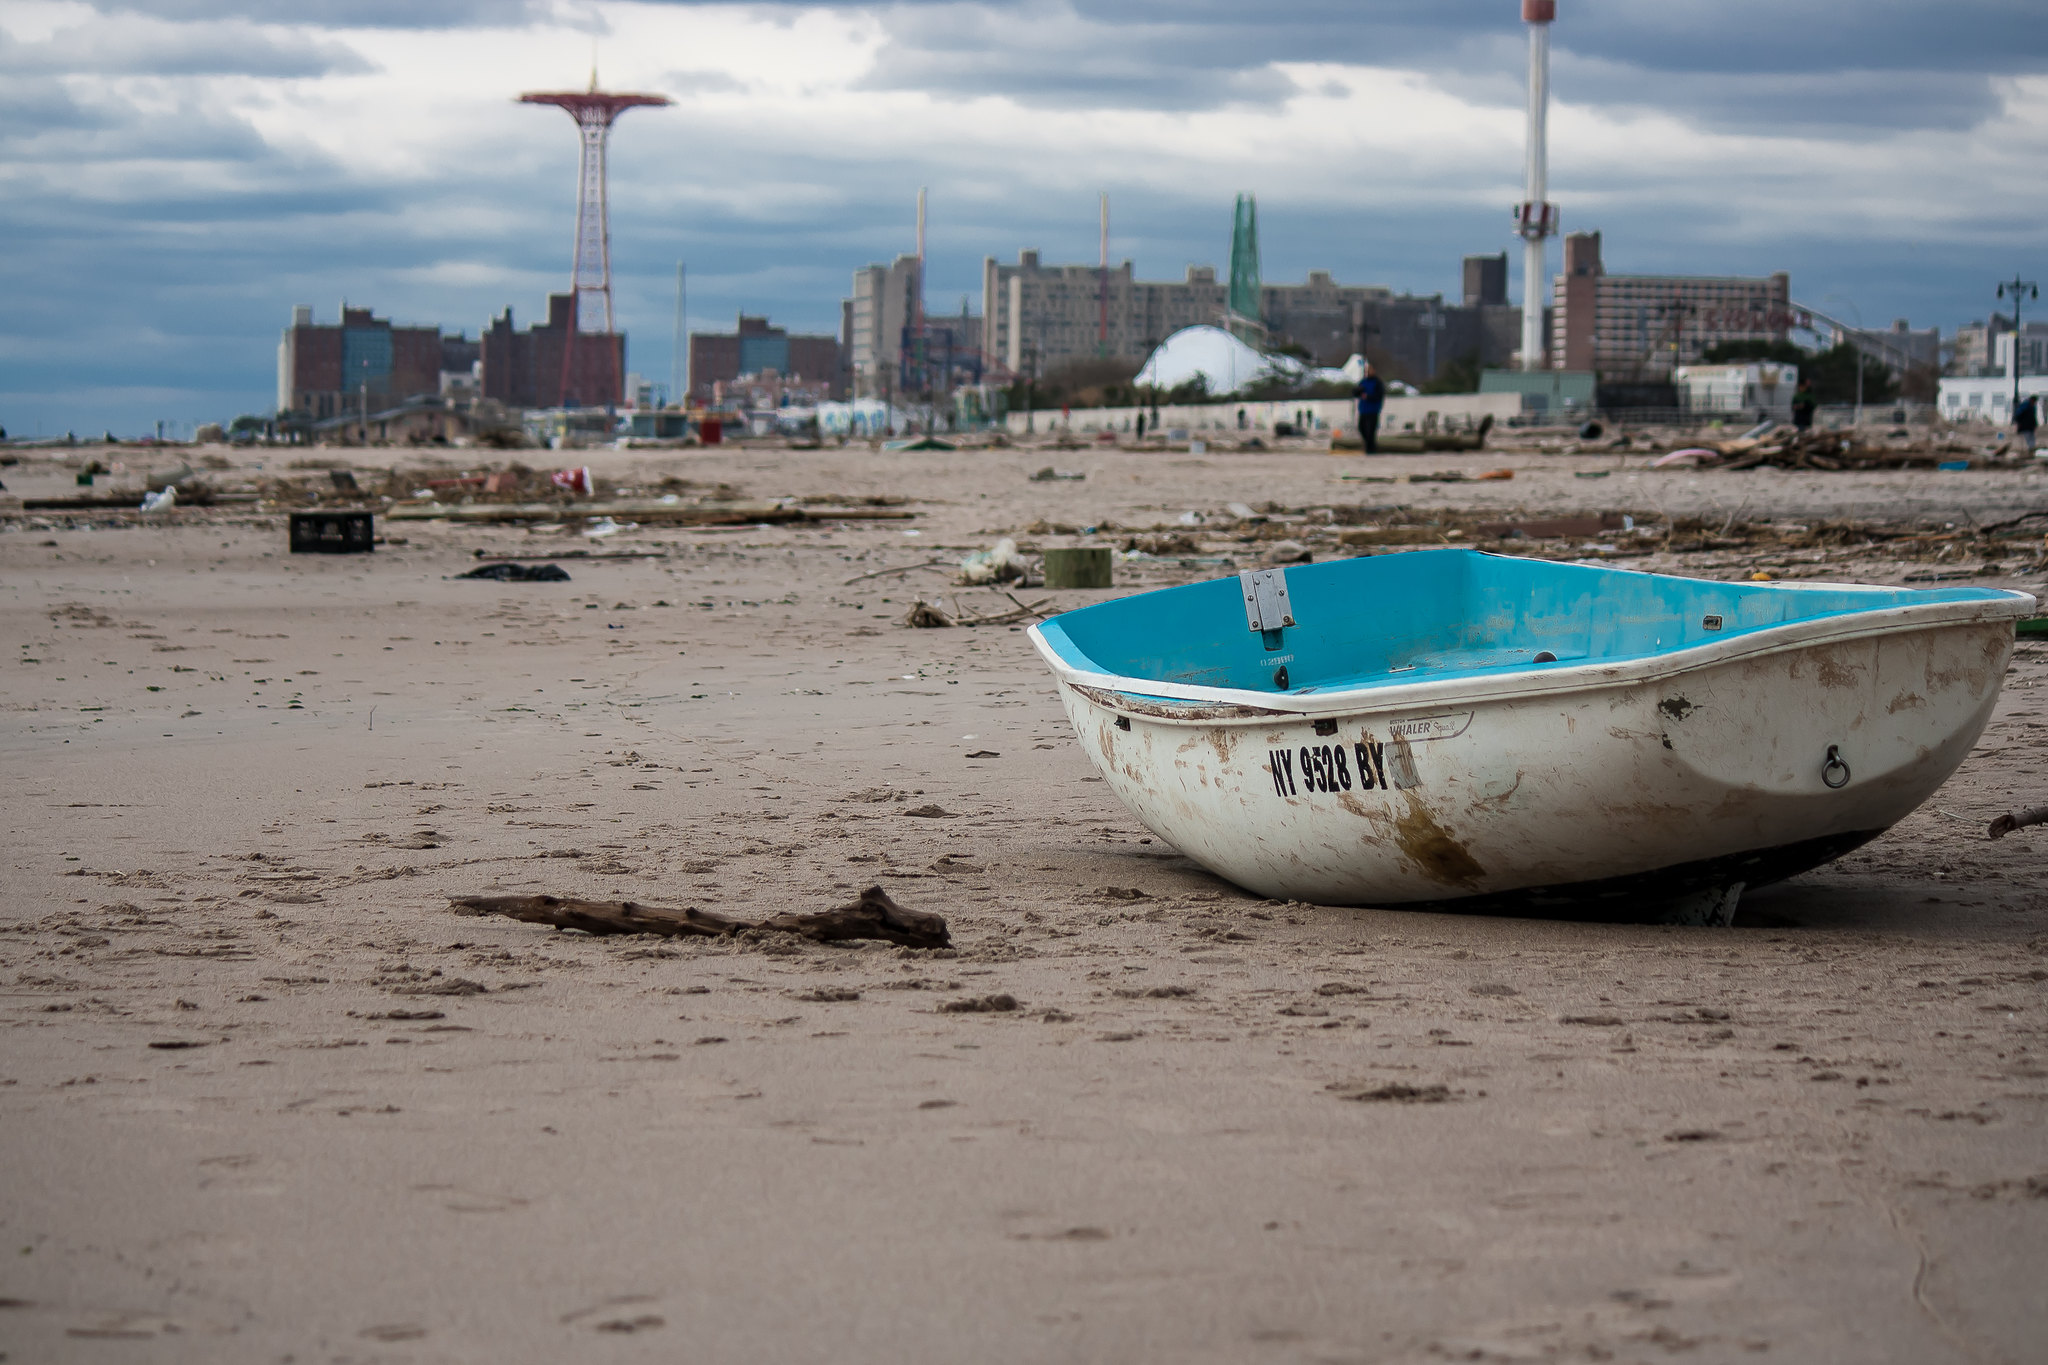 Debris and a banged-up boat are strewn across a beach. Battered buildings are in the distance.